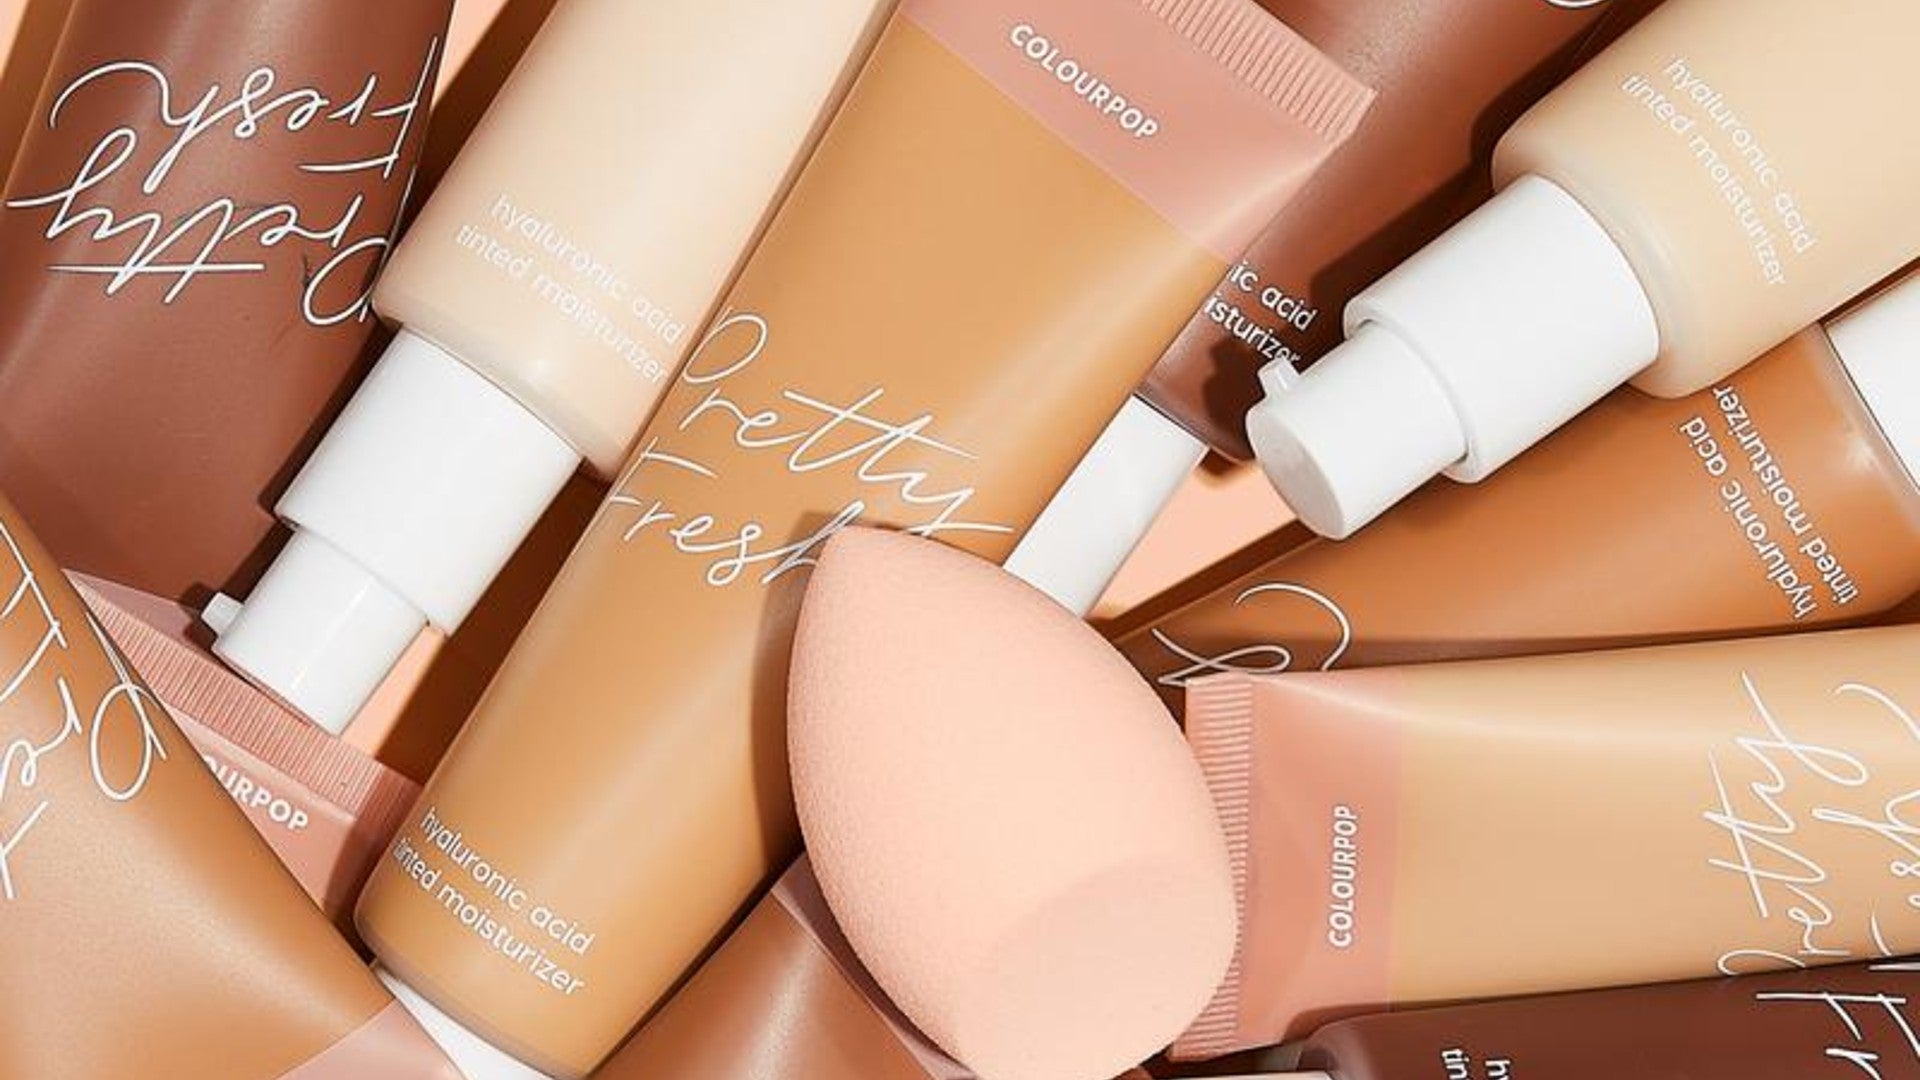 What I Double-Tapped This Week: The Case For Tinted Moisturizer